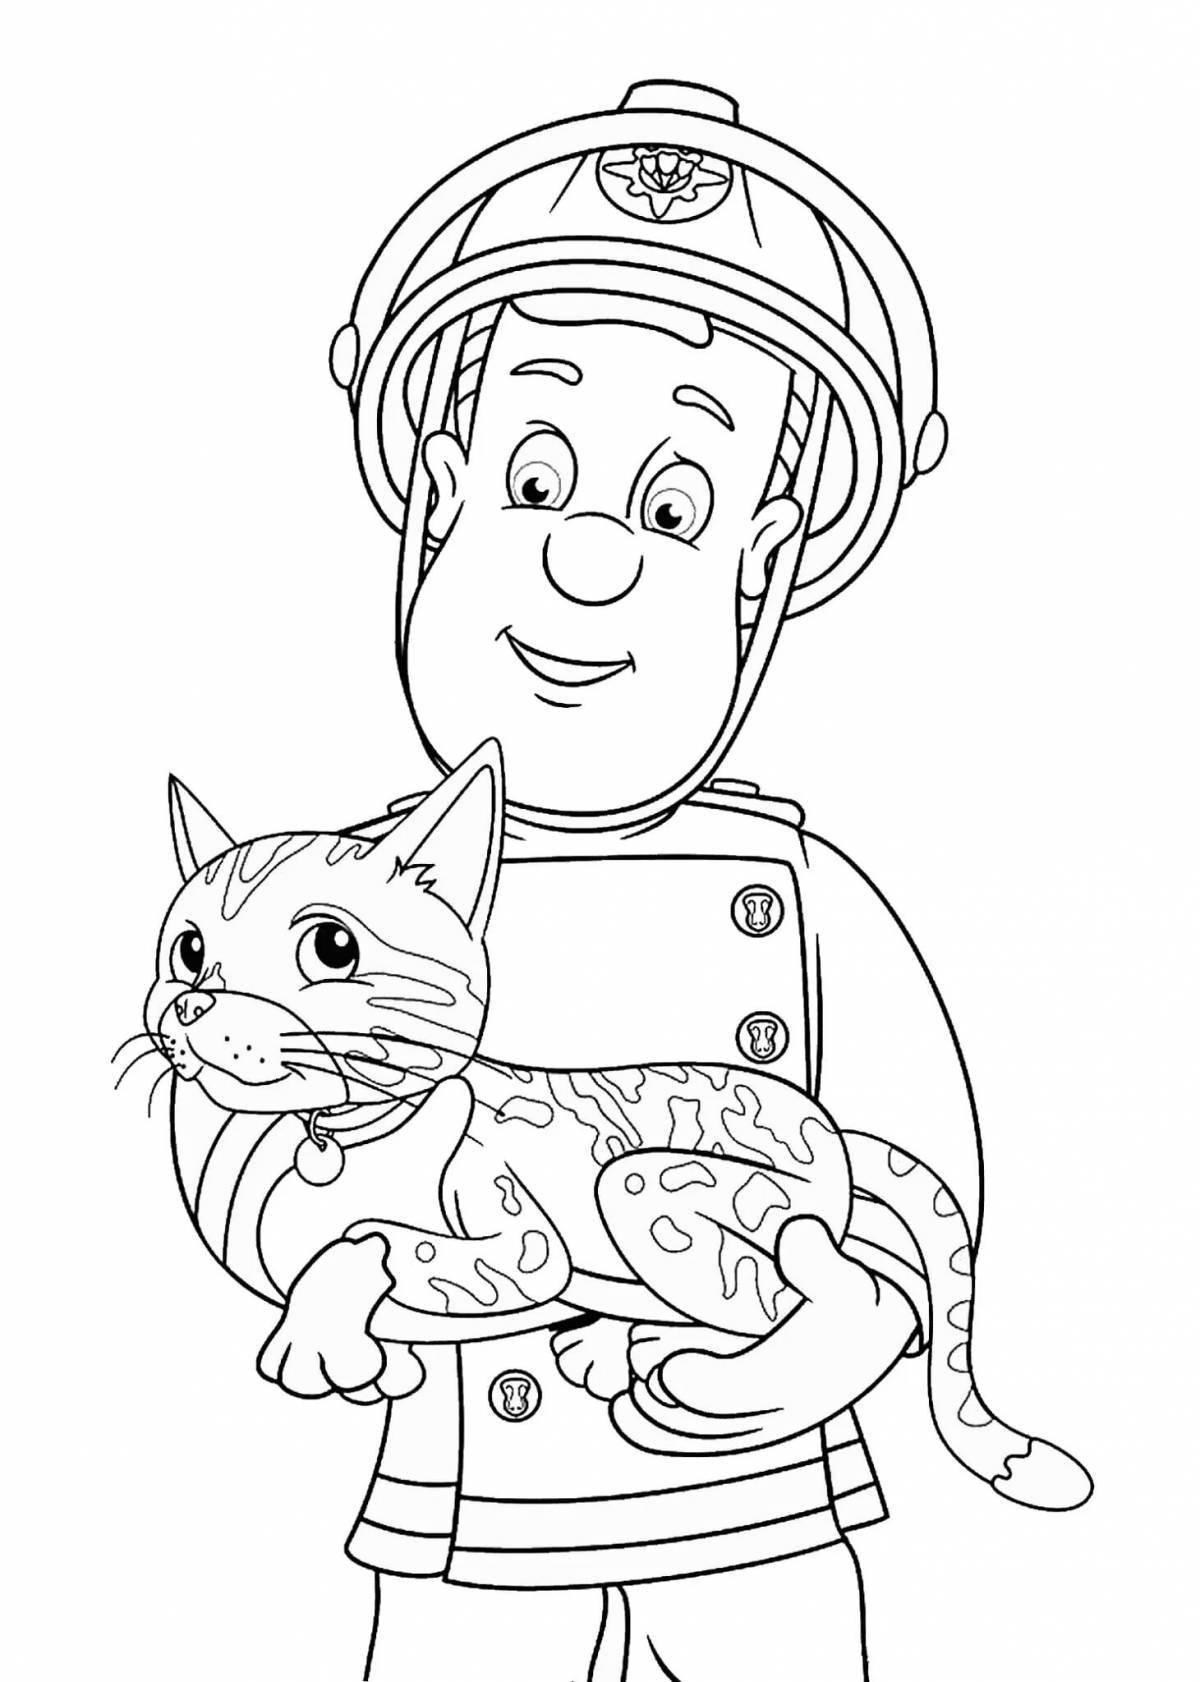 Exquisite fireman sam coloring book for kids